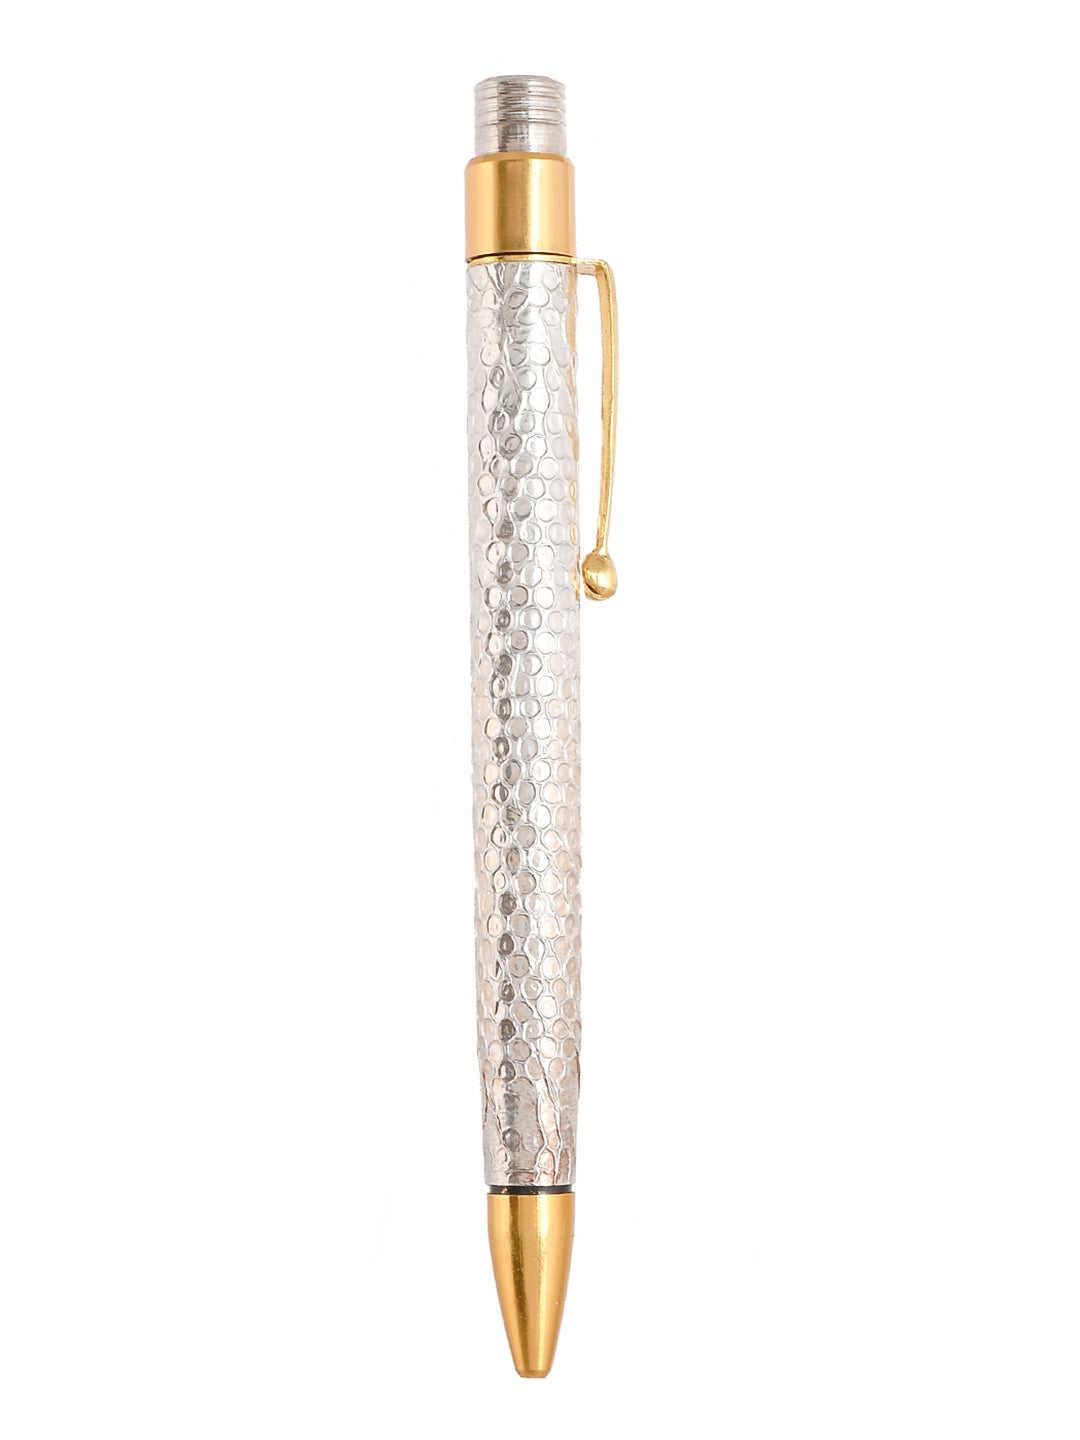 Chequered Sterling Silver Pen For Gift